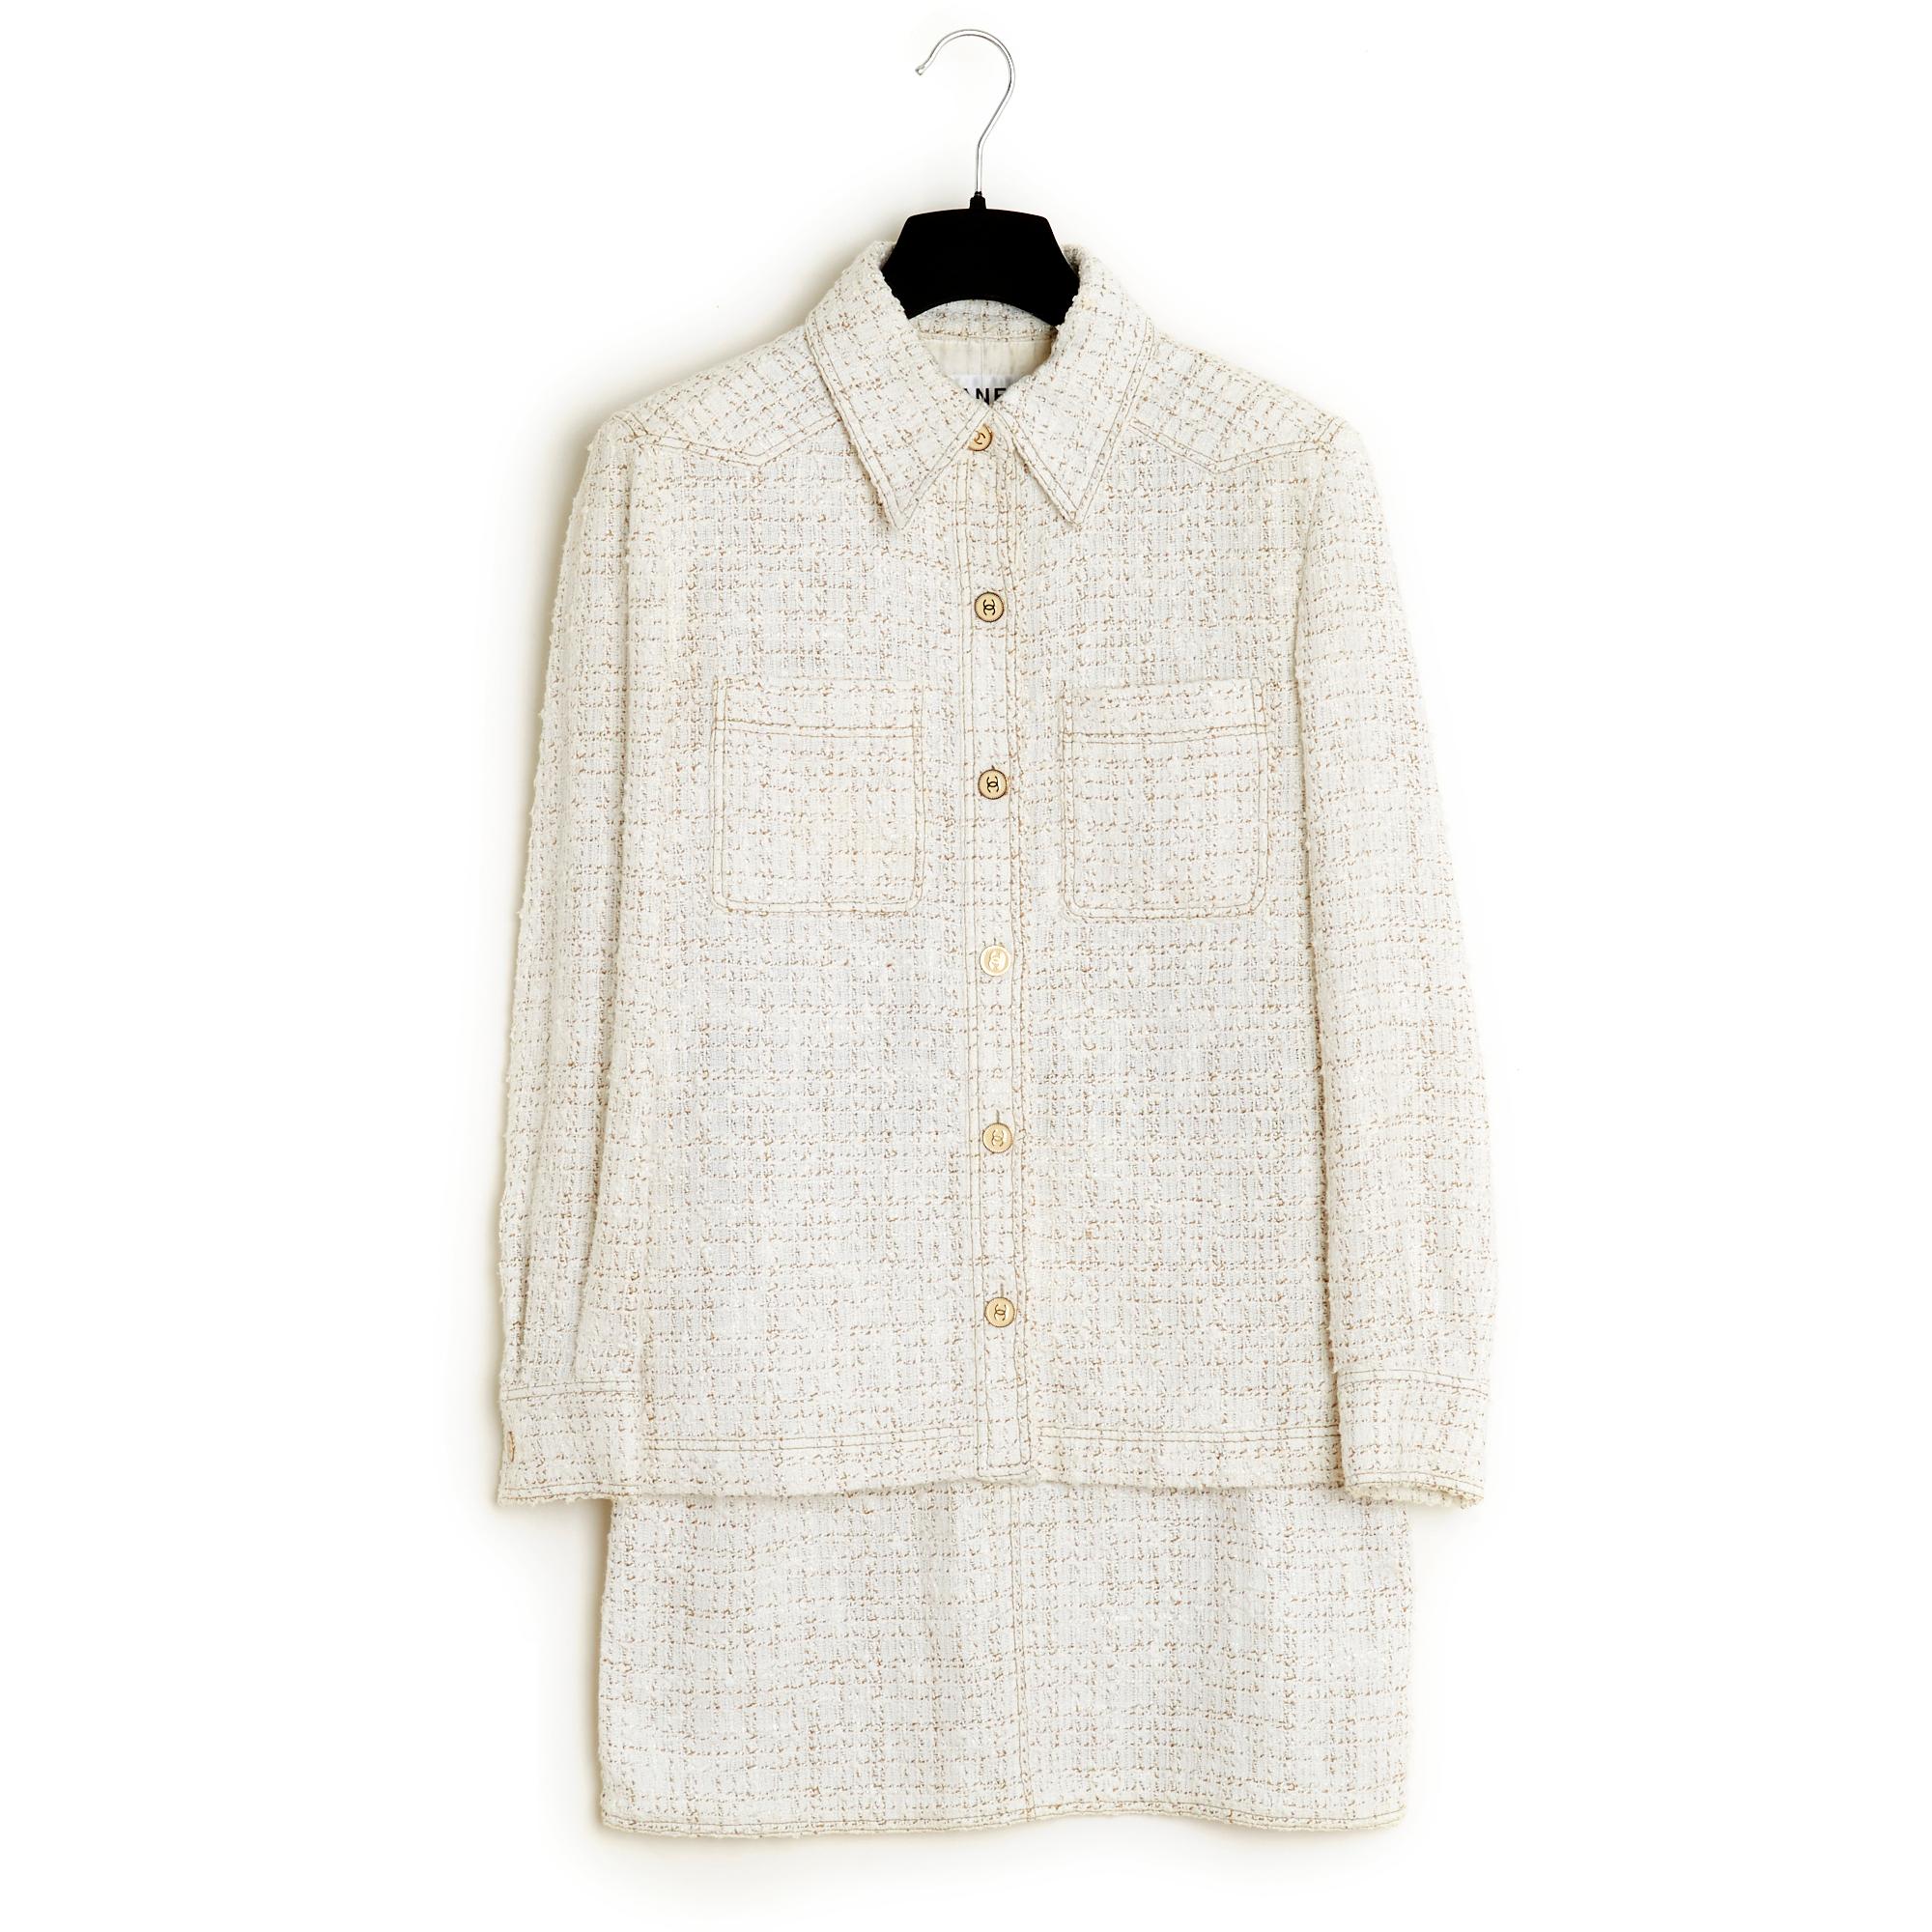 Chanel Spring Summer 2001 collection collection in ecru and beige cotton blend tweed composed of a shirt jacket, classic collar closed with 6 CC logo buttons, 2 patch pockets on the chest, long sleeves closed with matching buttons, and a skirt